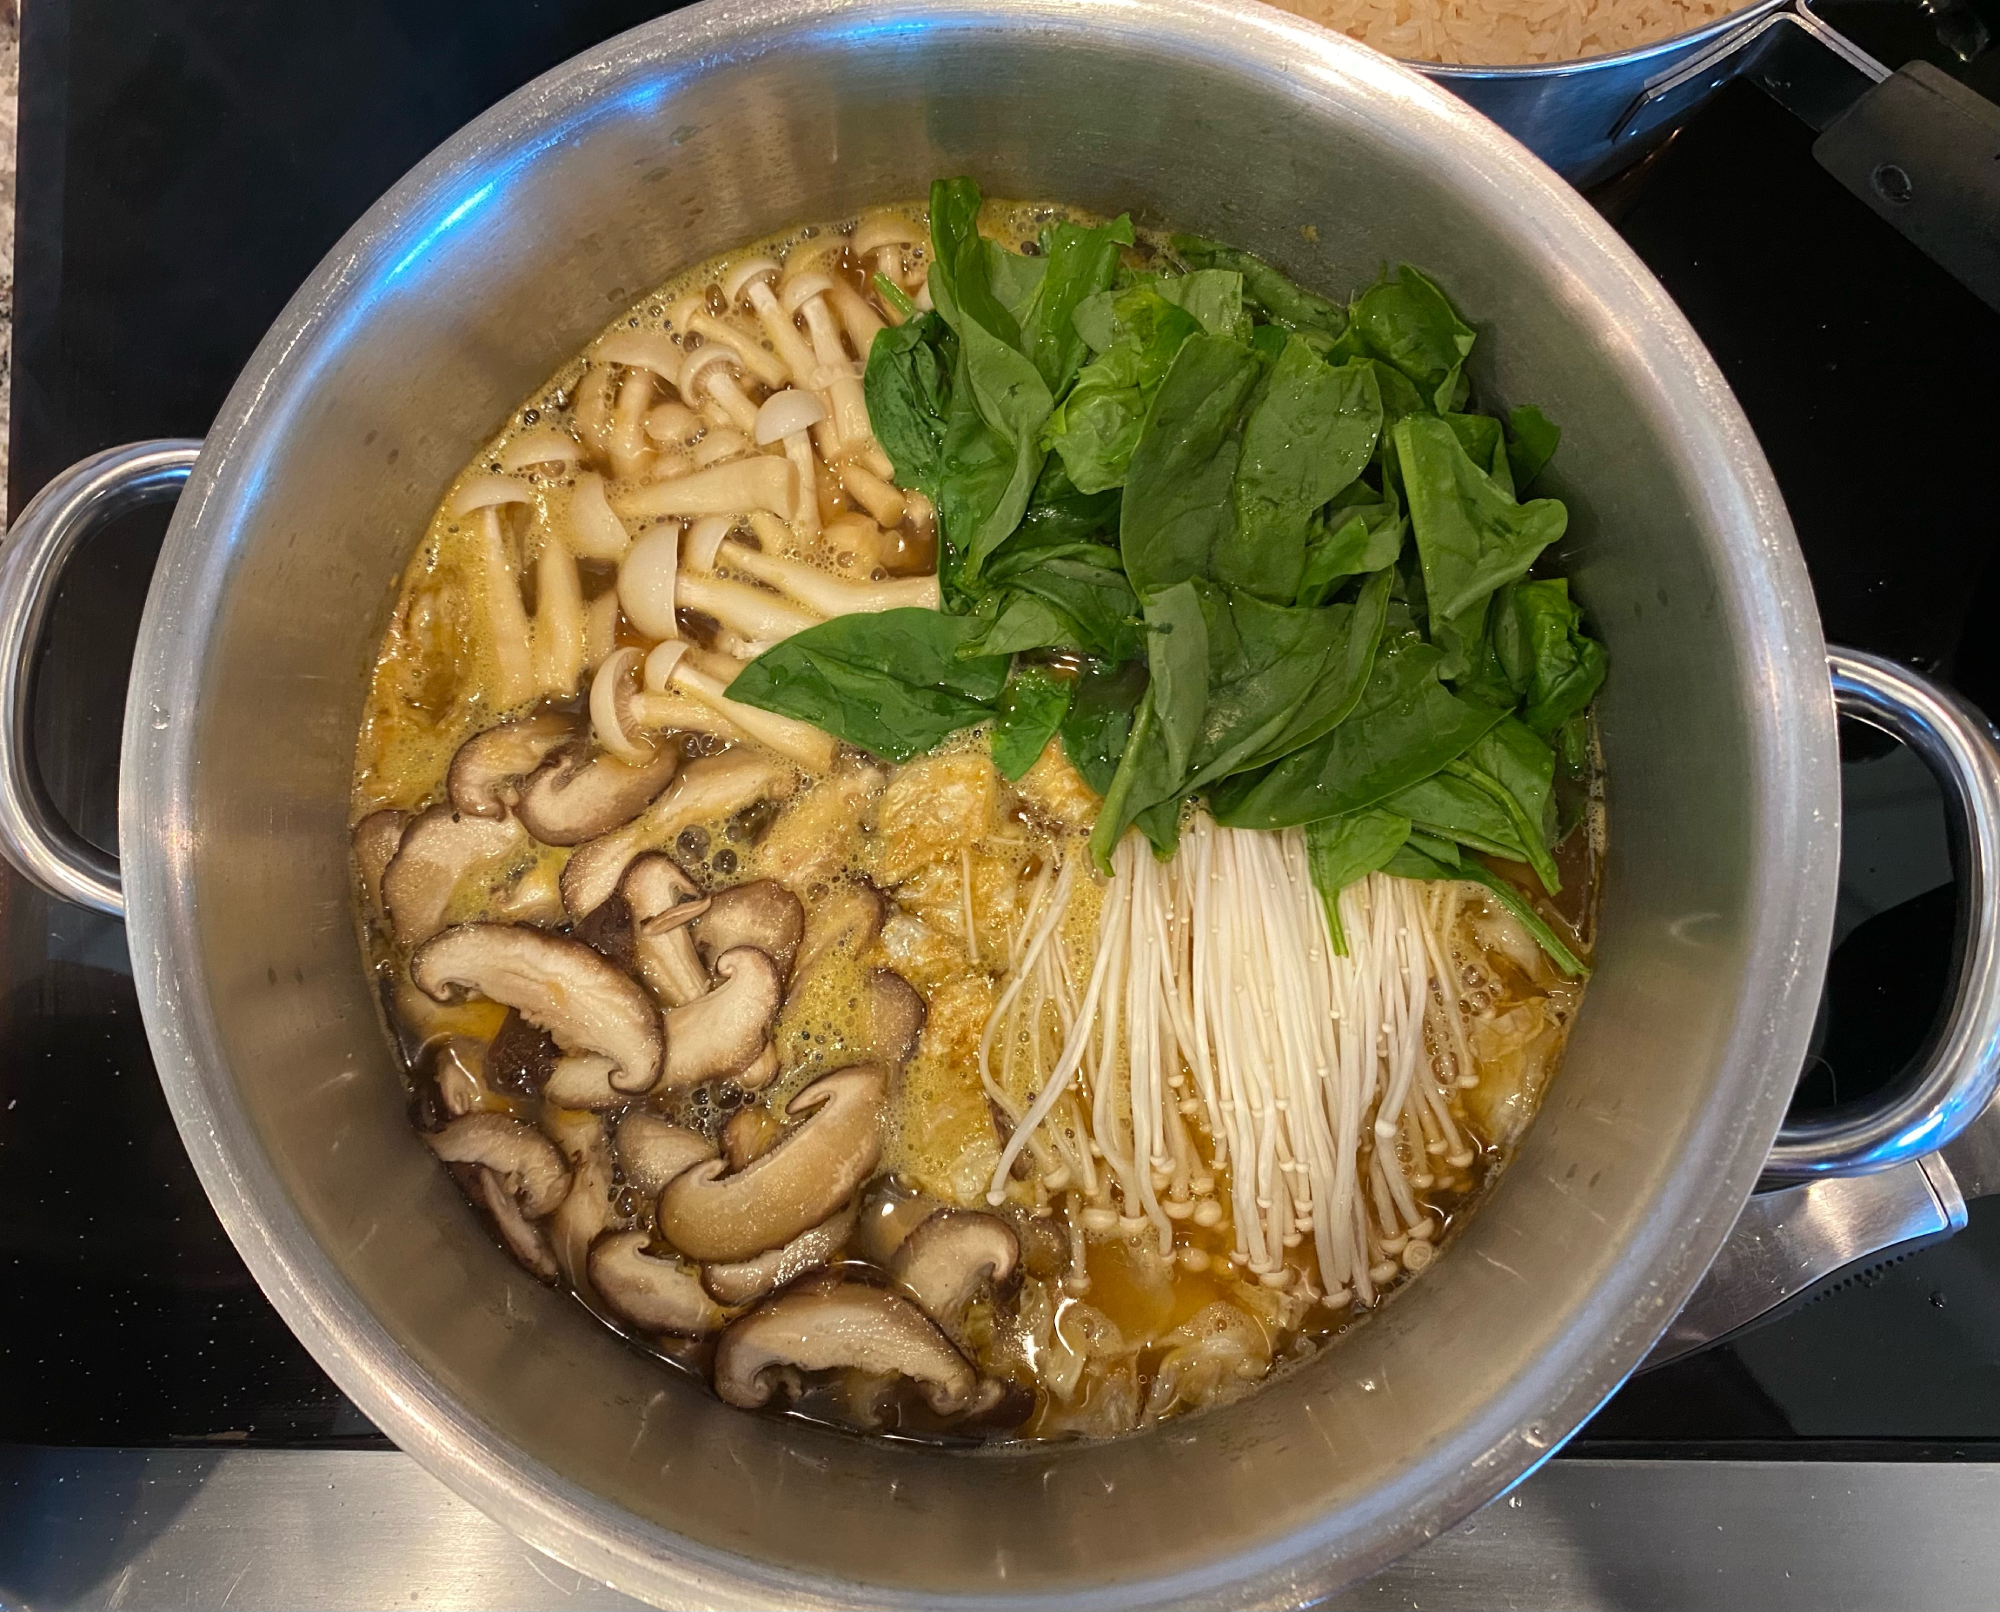 Overhead shot of a large soup pot. 3 types of mushrooms and a clump of spinach float on top in separate quartered sections. 